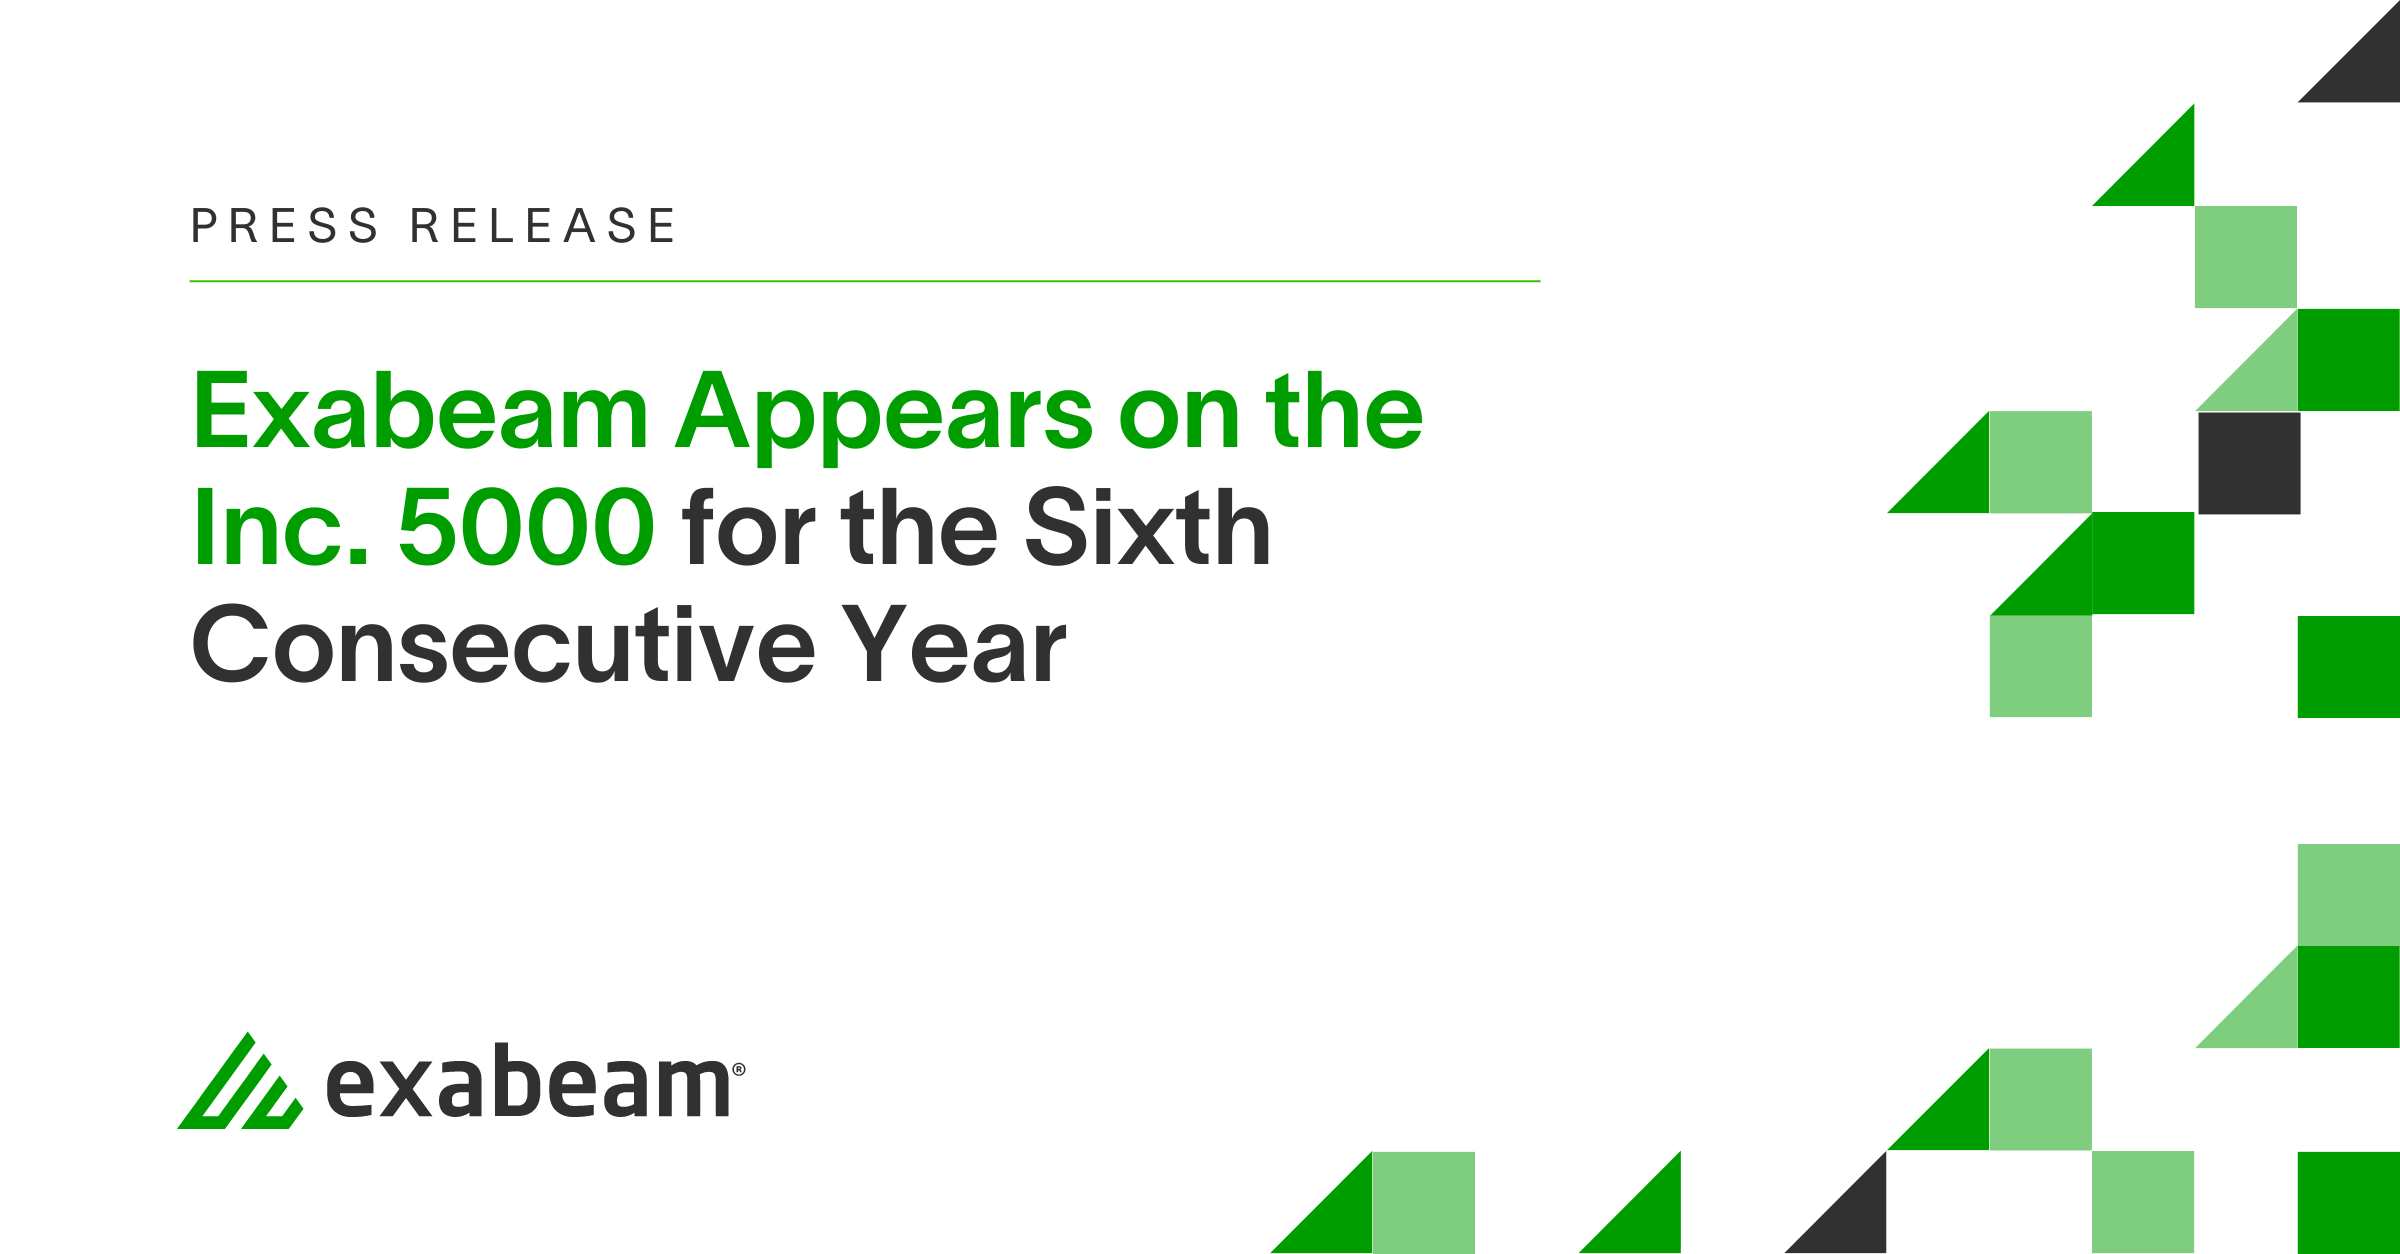 Exabeam Appears on the Inc. 5000 for the Sixth Consecutive Year